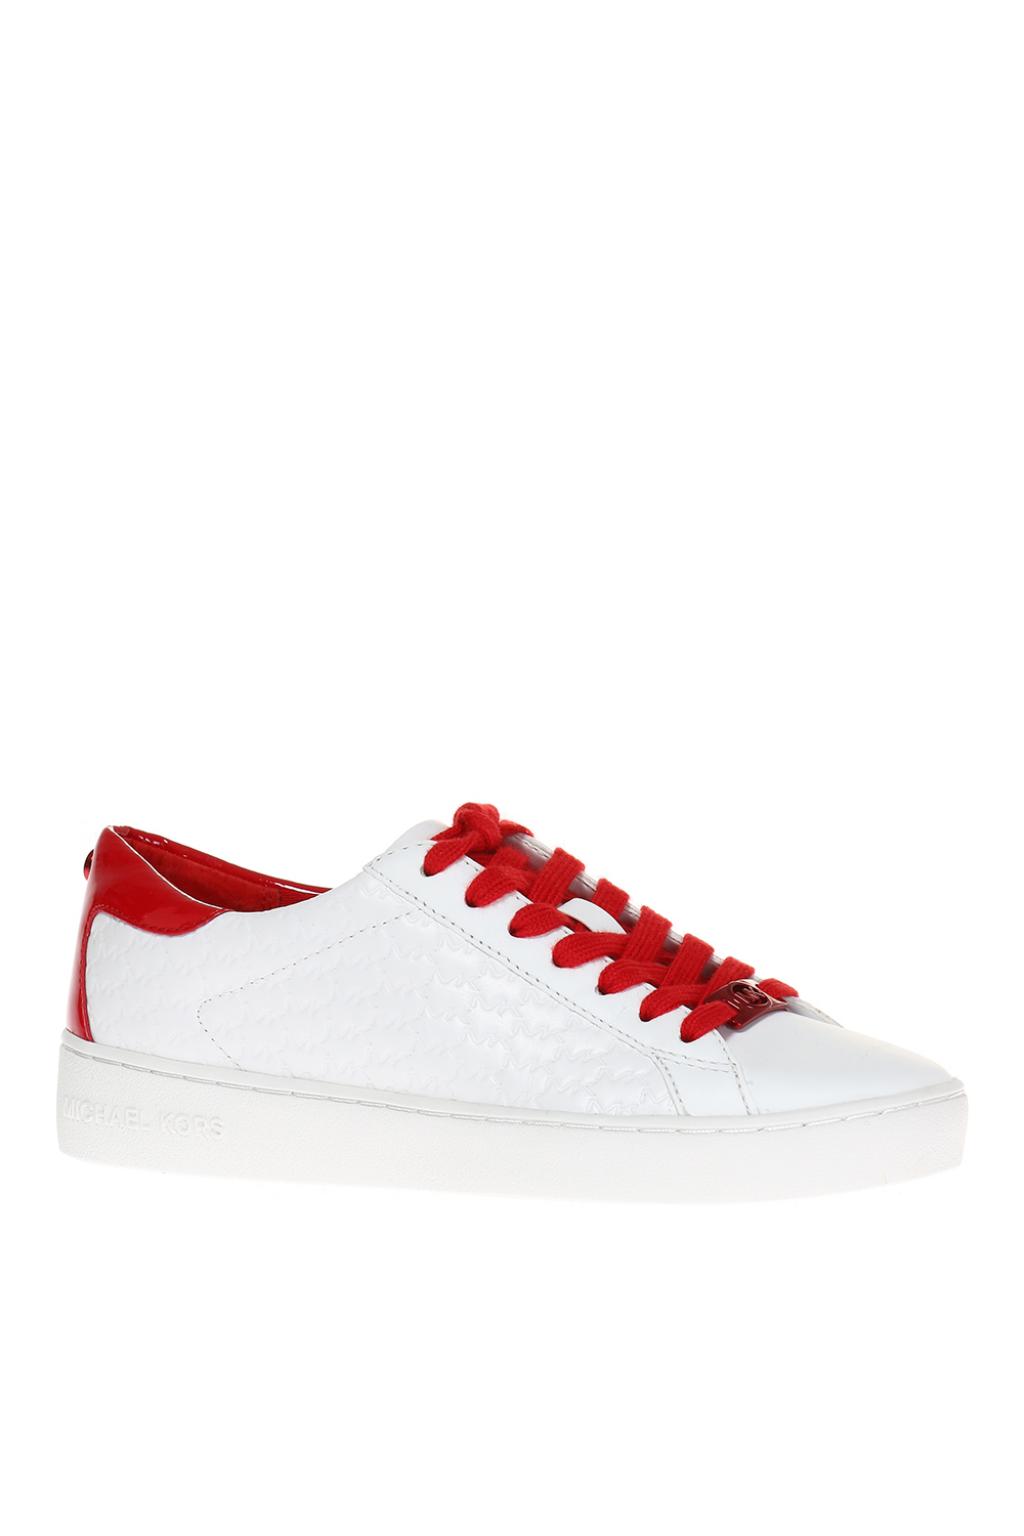 michael kors white and red sneakers